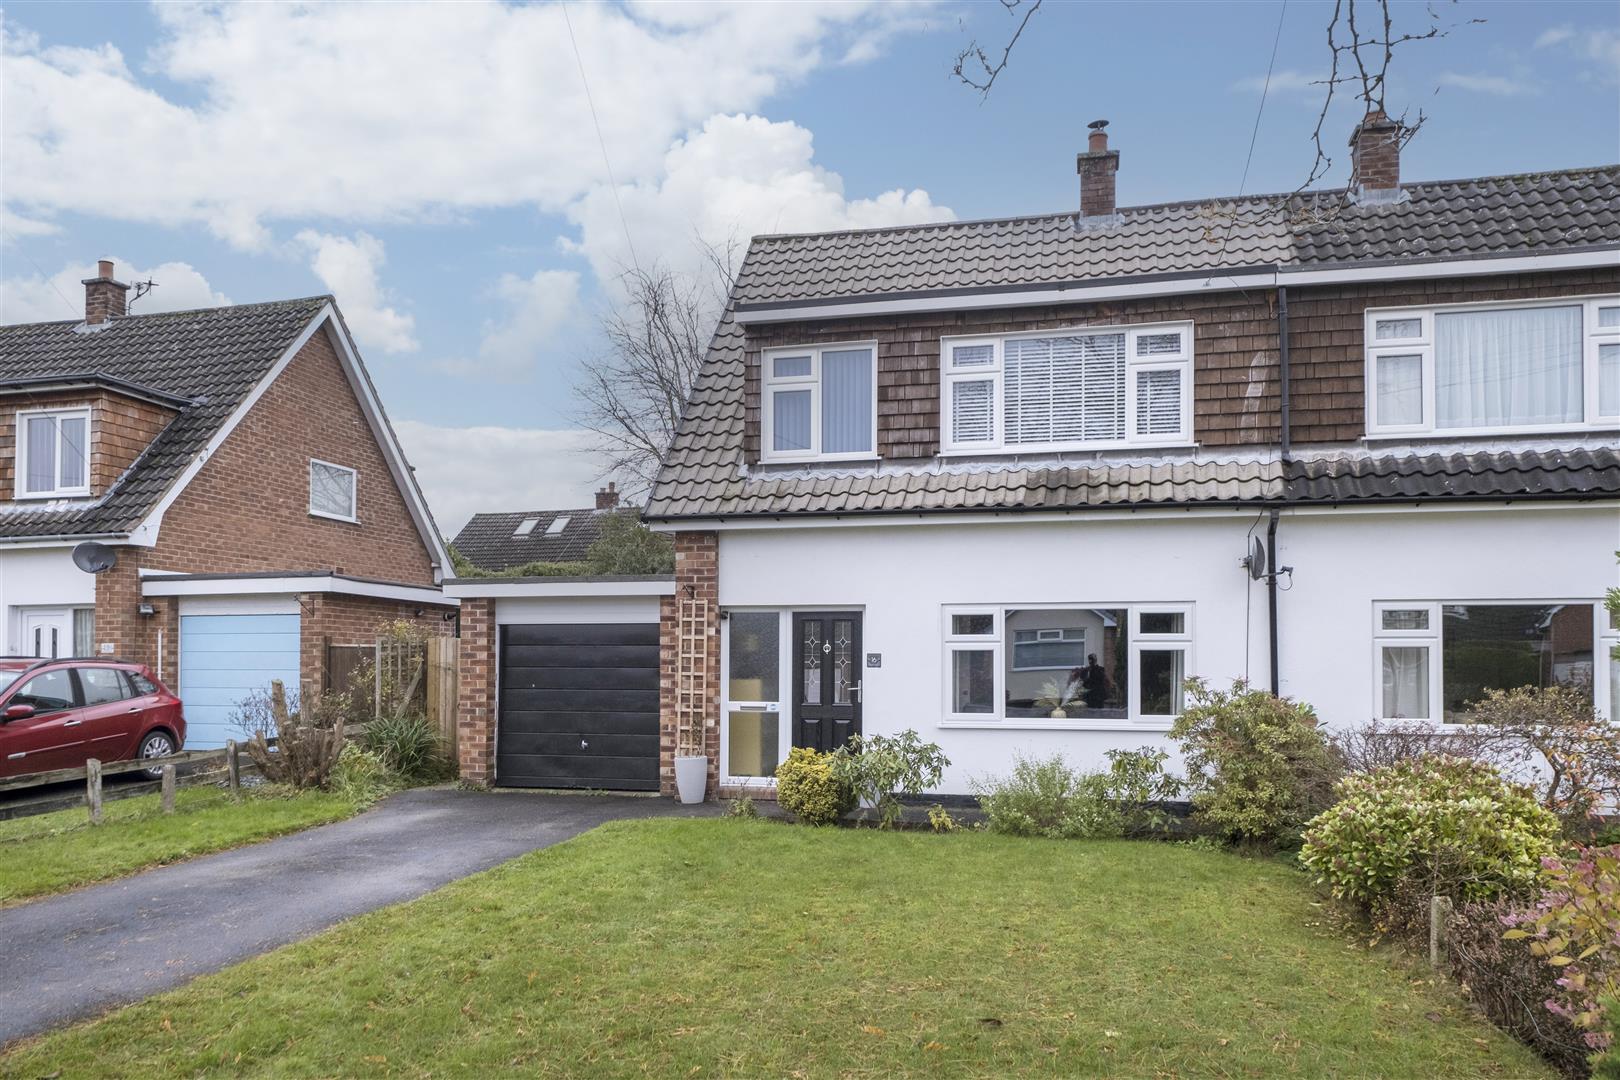 3 bedroom  Semi Detached House for Sale in Winsford